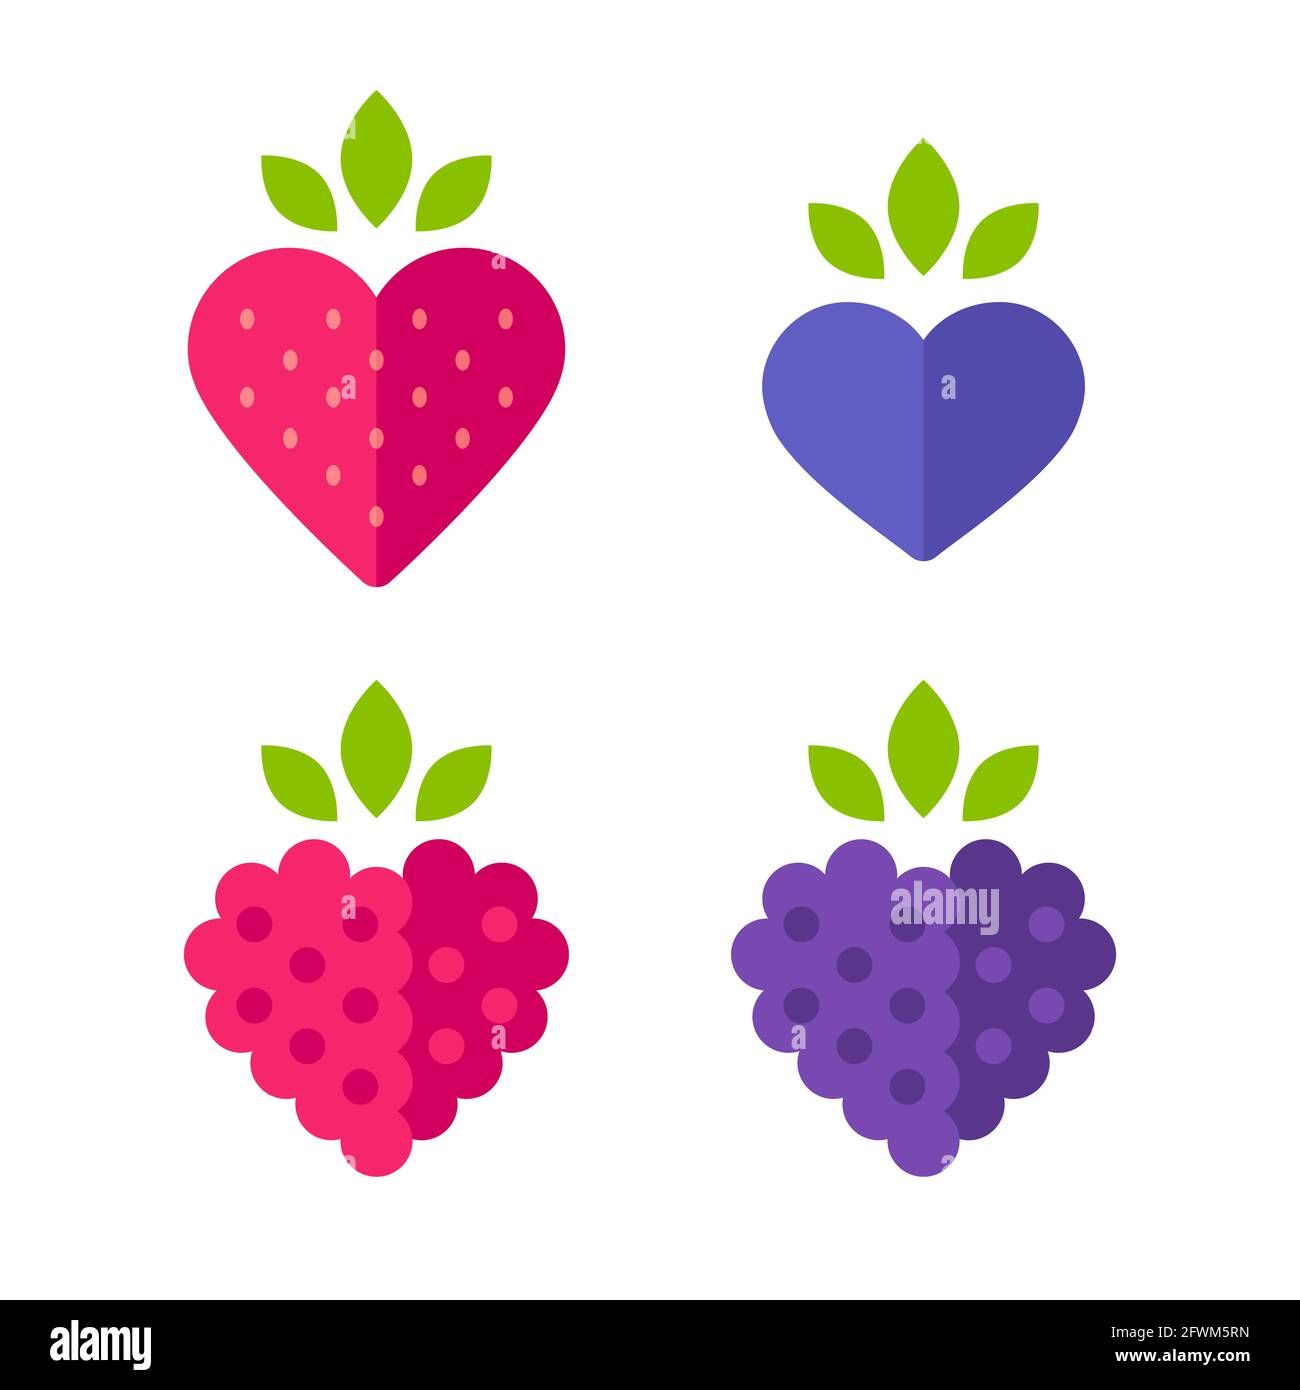 Heart shaped berries icon set. Strawberry, blueberry, blackberry and raspberry. Flat stylized vector illustration. Stock Vector